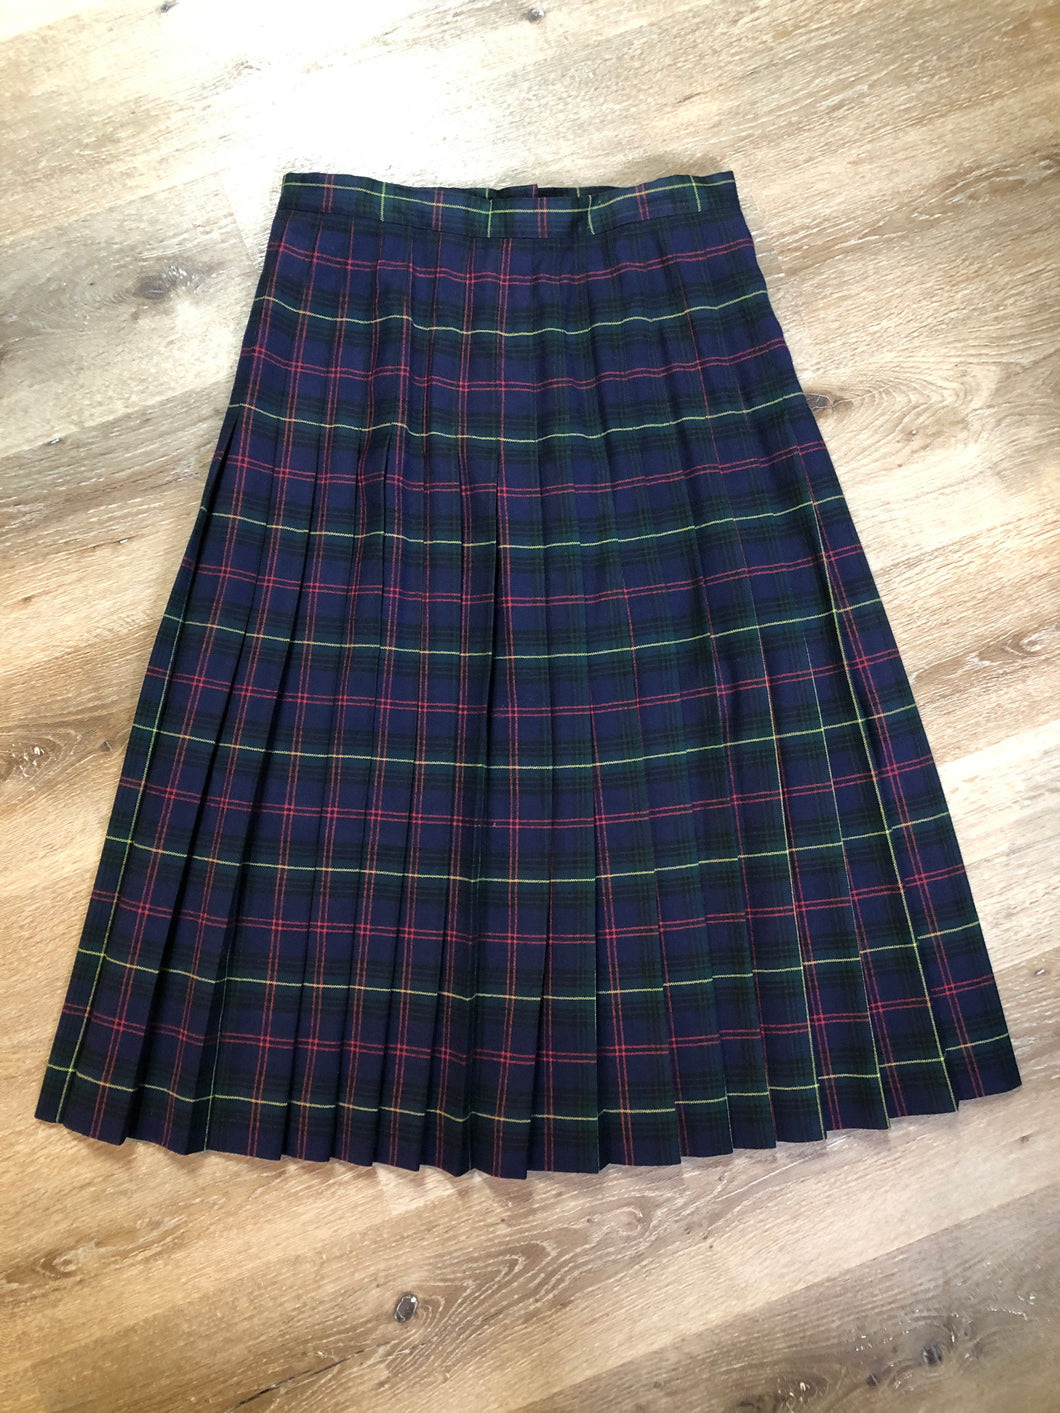 Kingspier Vintage - Courageous 100% wool fashion kilt in navy, green, red, yellow and black plaid. Made in Canada.